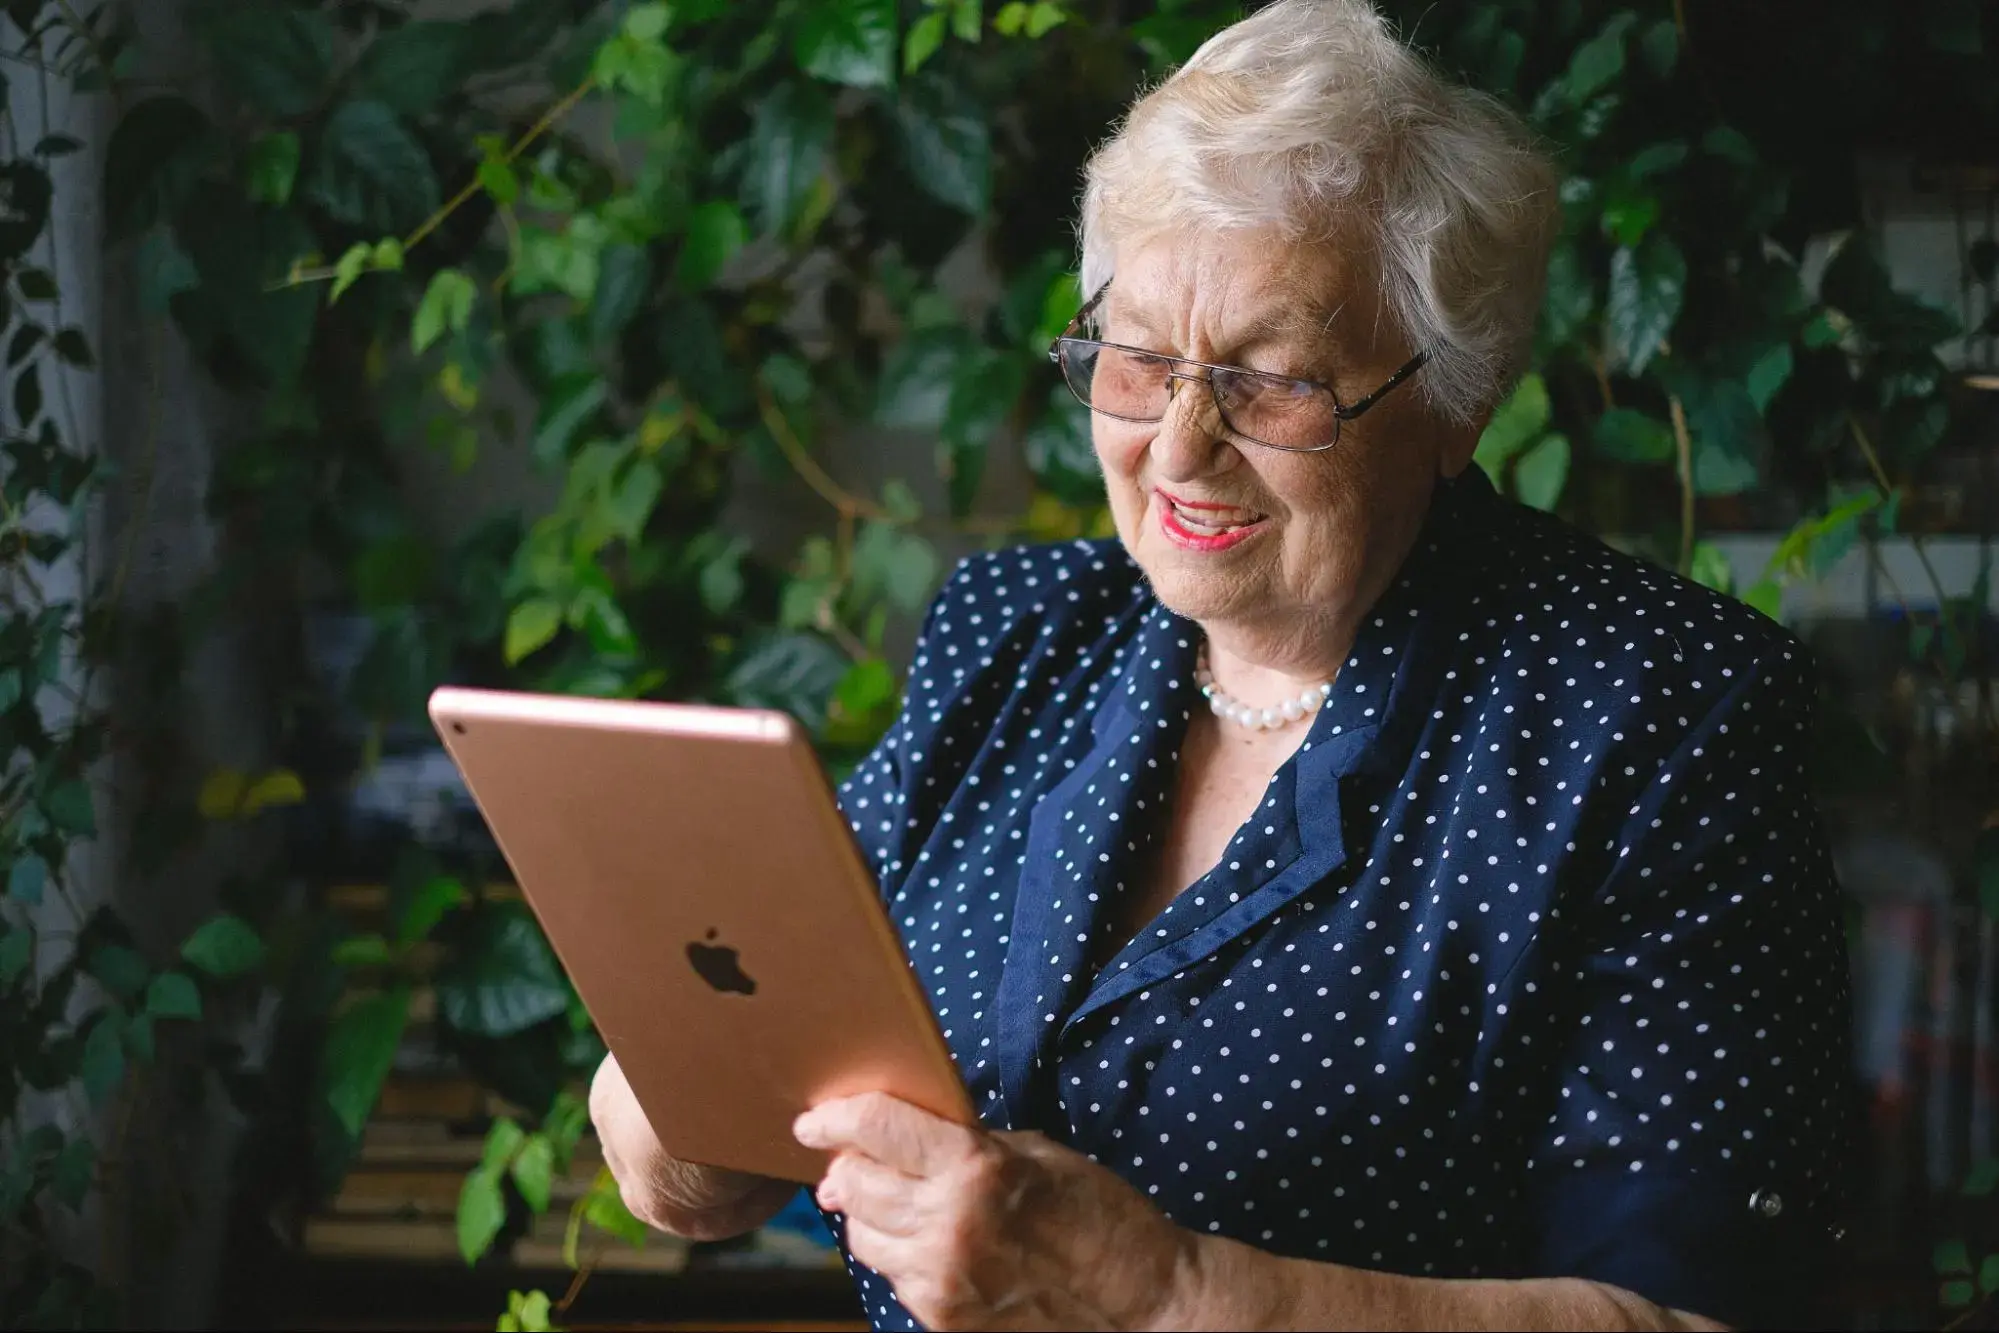 An elderly lady researching the Medicare PFFS plan costs.